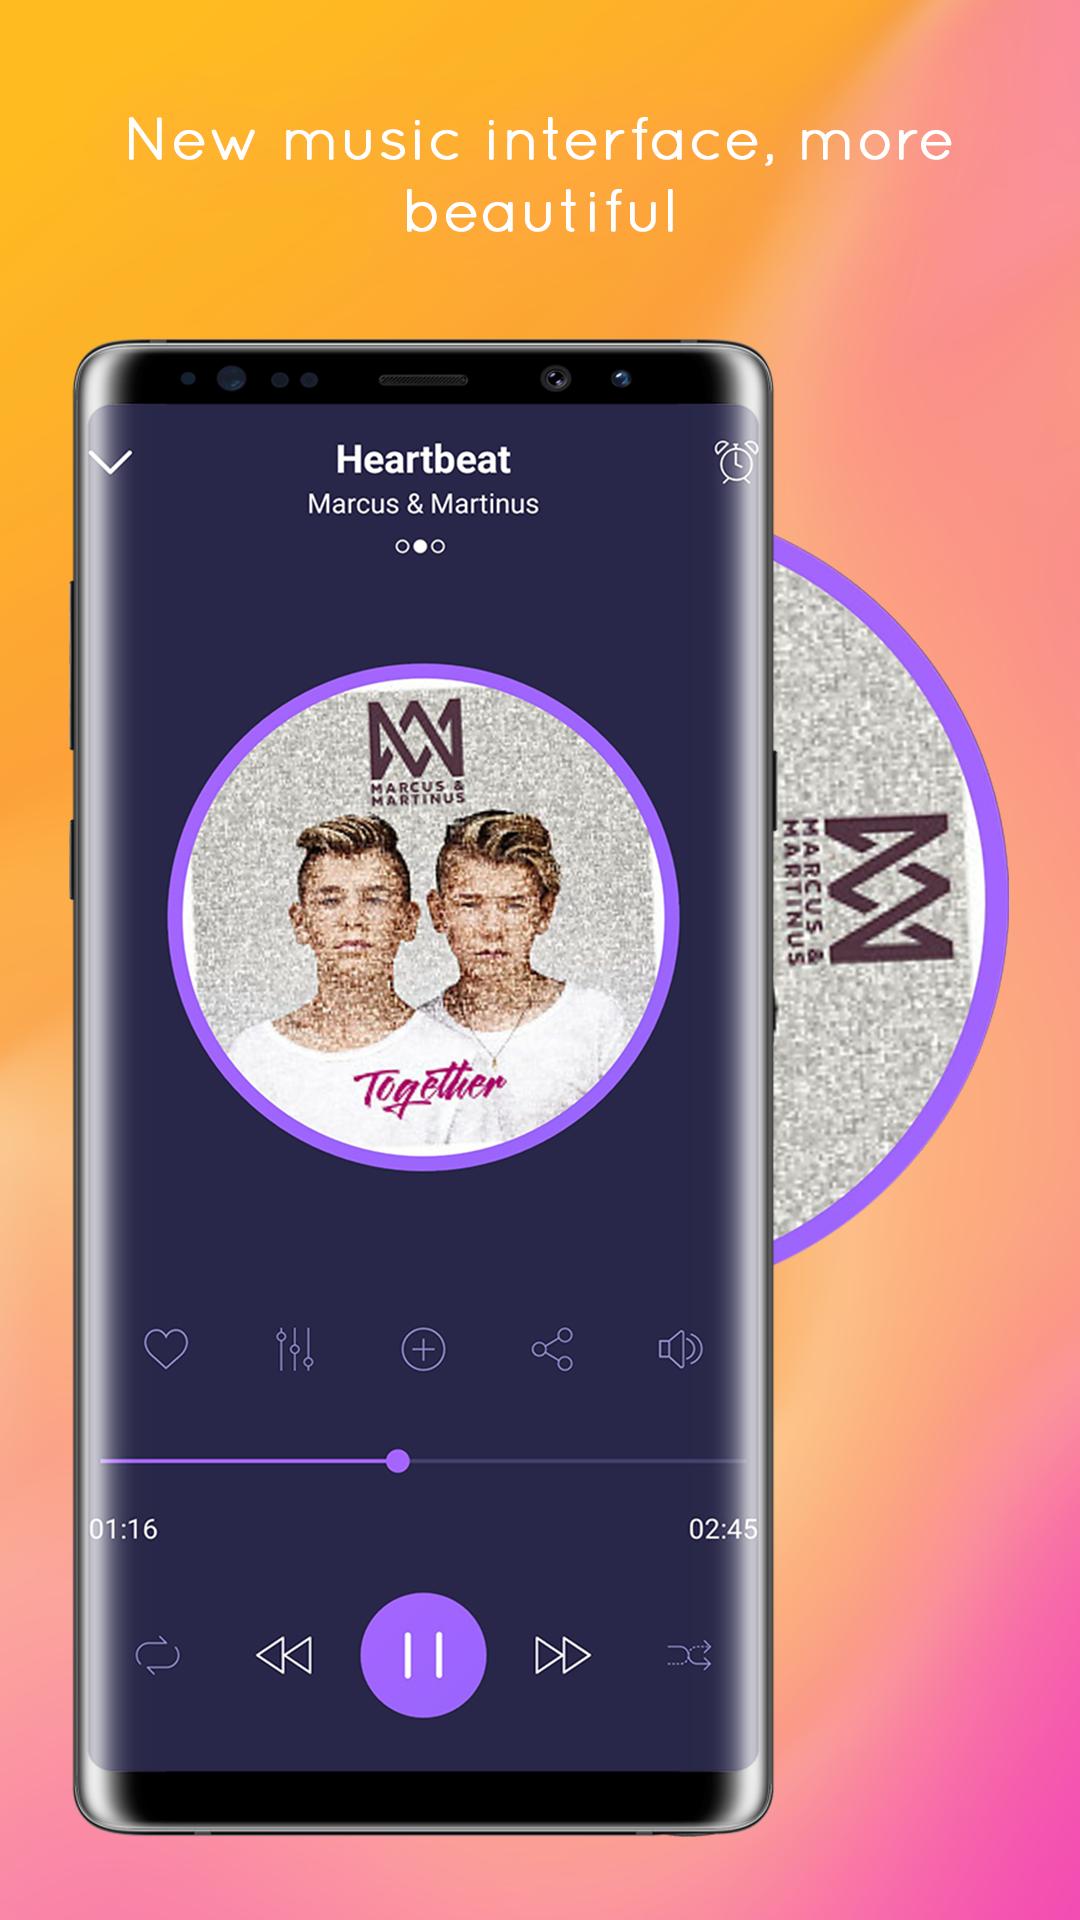 Galaxy Note 9 Music Player for Android - APK Download